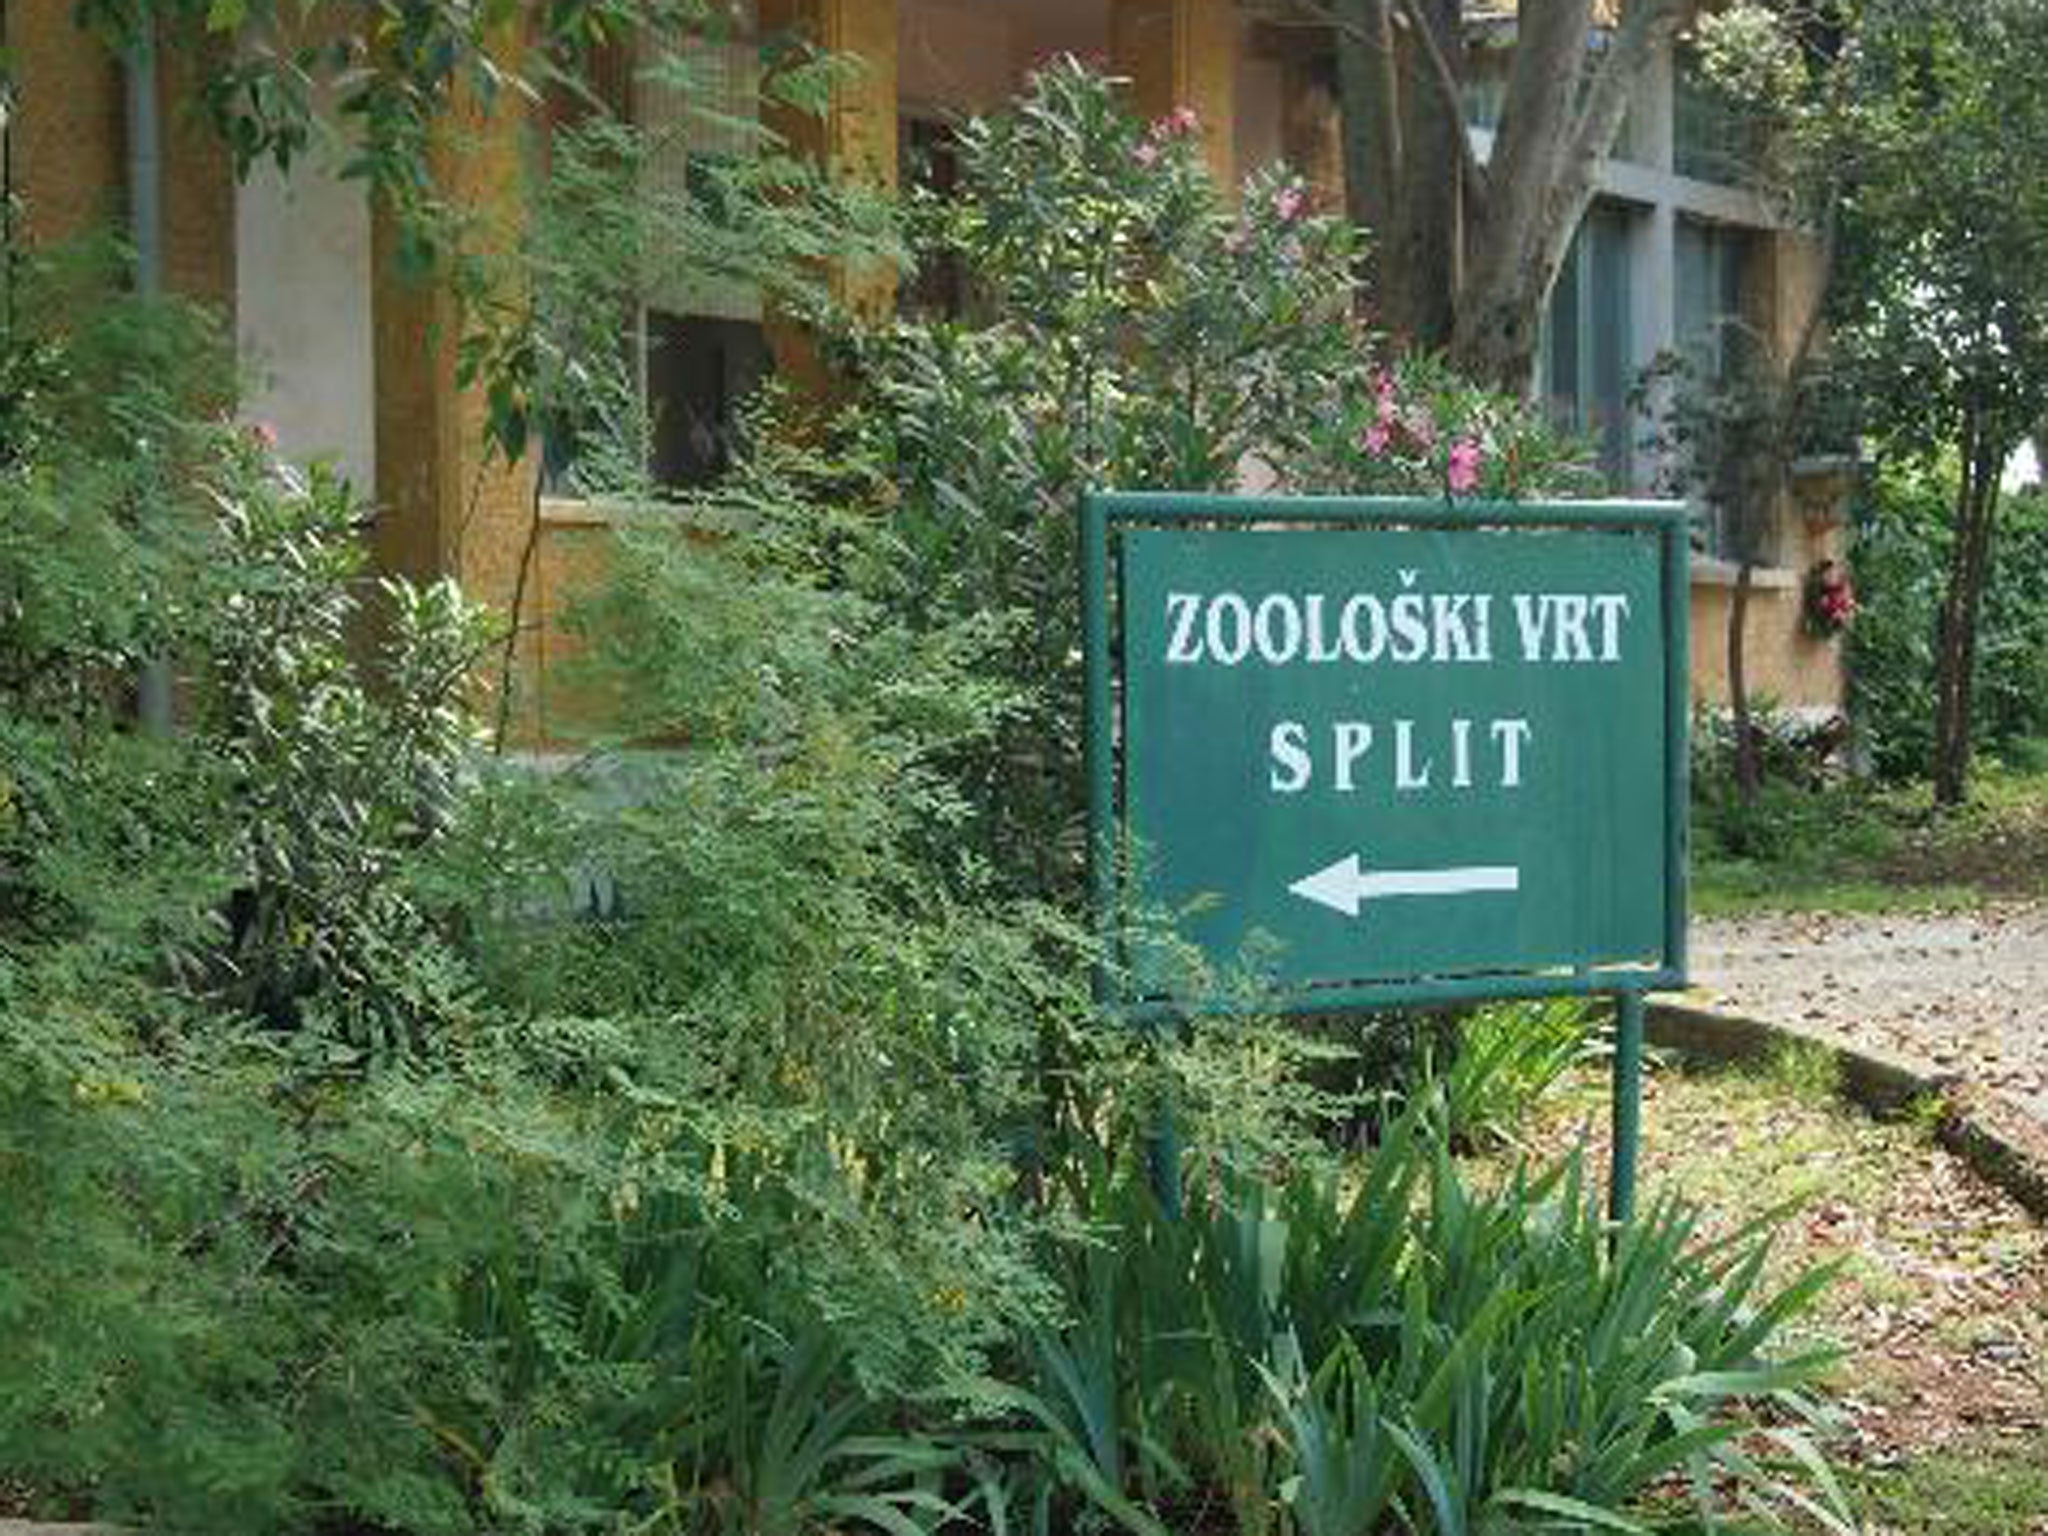 The entrance to the zoo in Split, which is now being closed